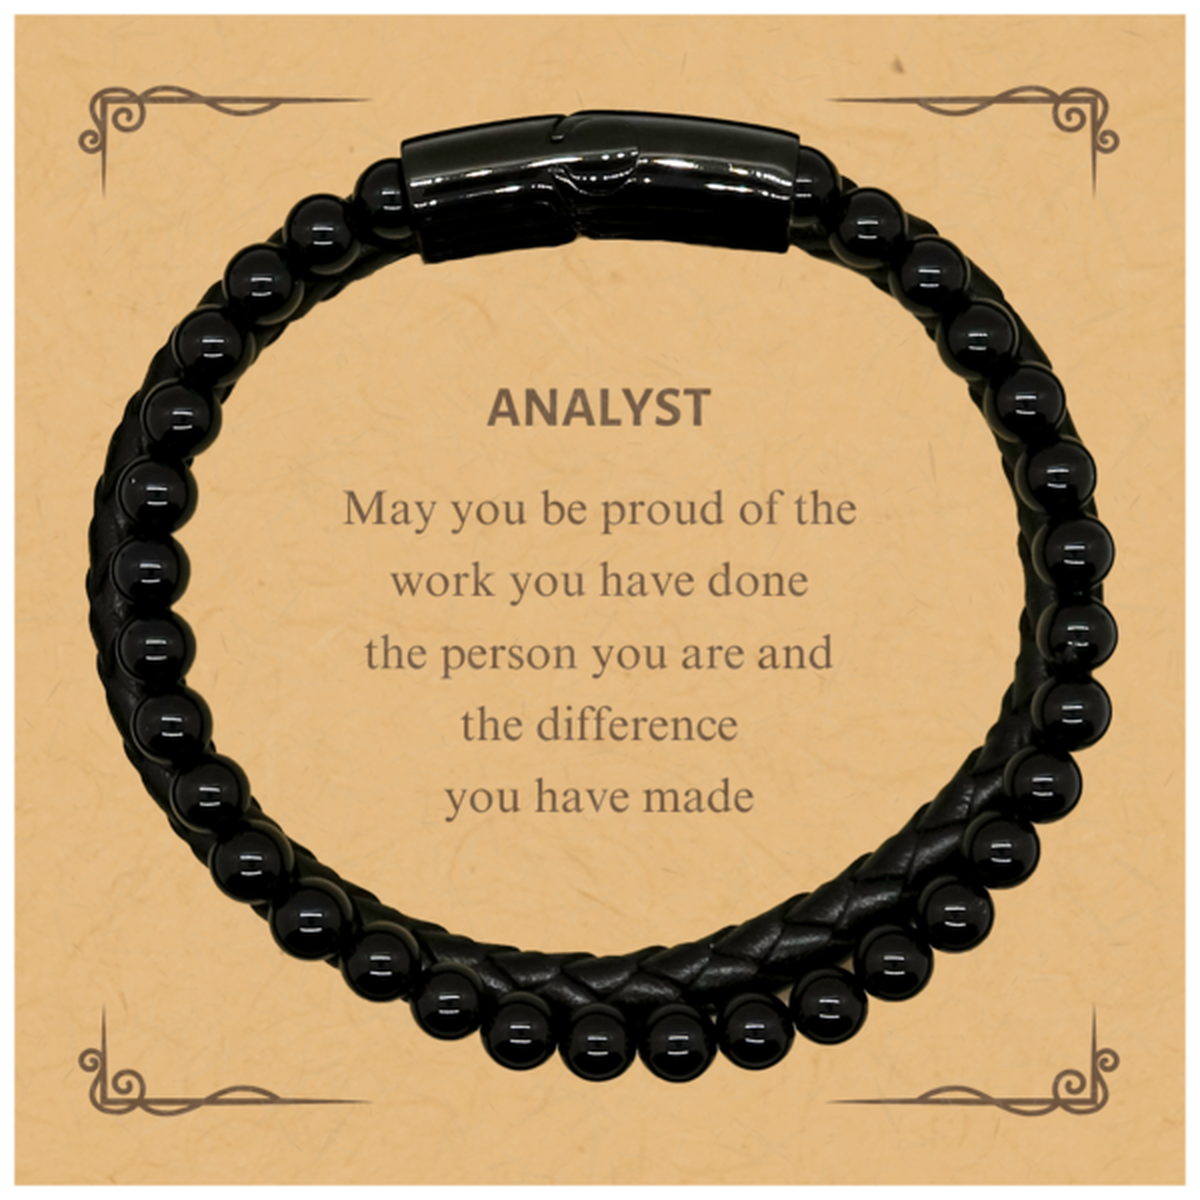 Analyst May you be proud of the work you have done, Retirement Analyst Stone Leather Bracelets for Colleague Appreciation Gifts Amazing for Analyst